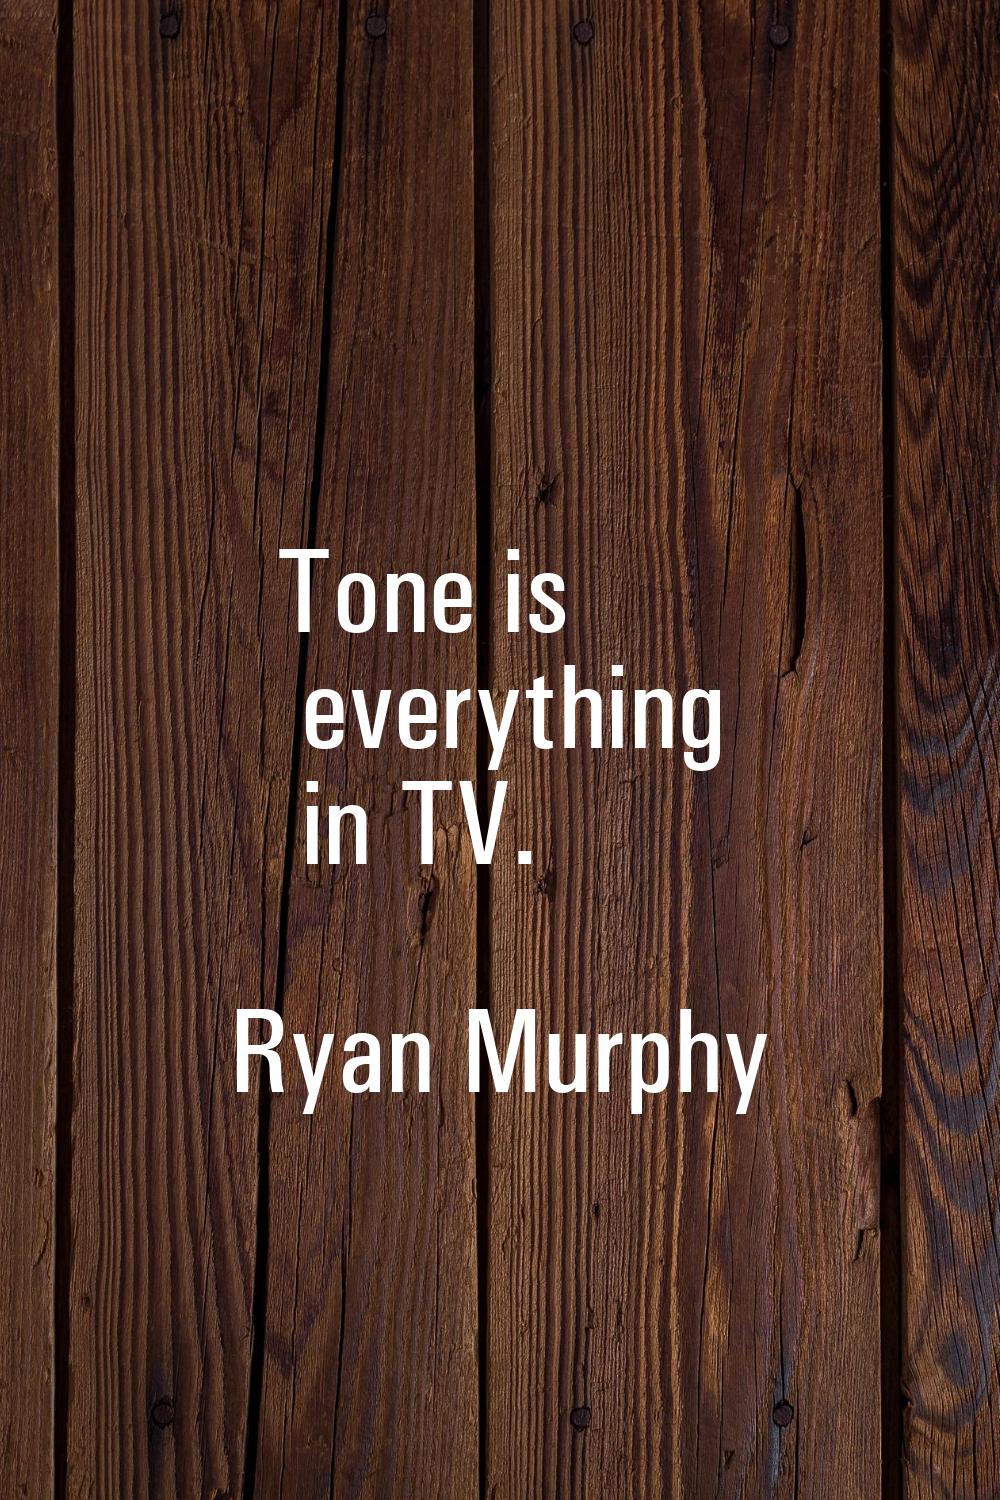 Tone is everything in TV.